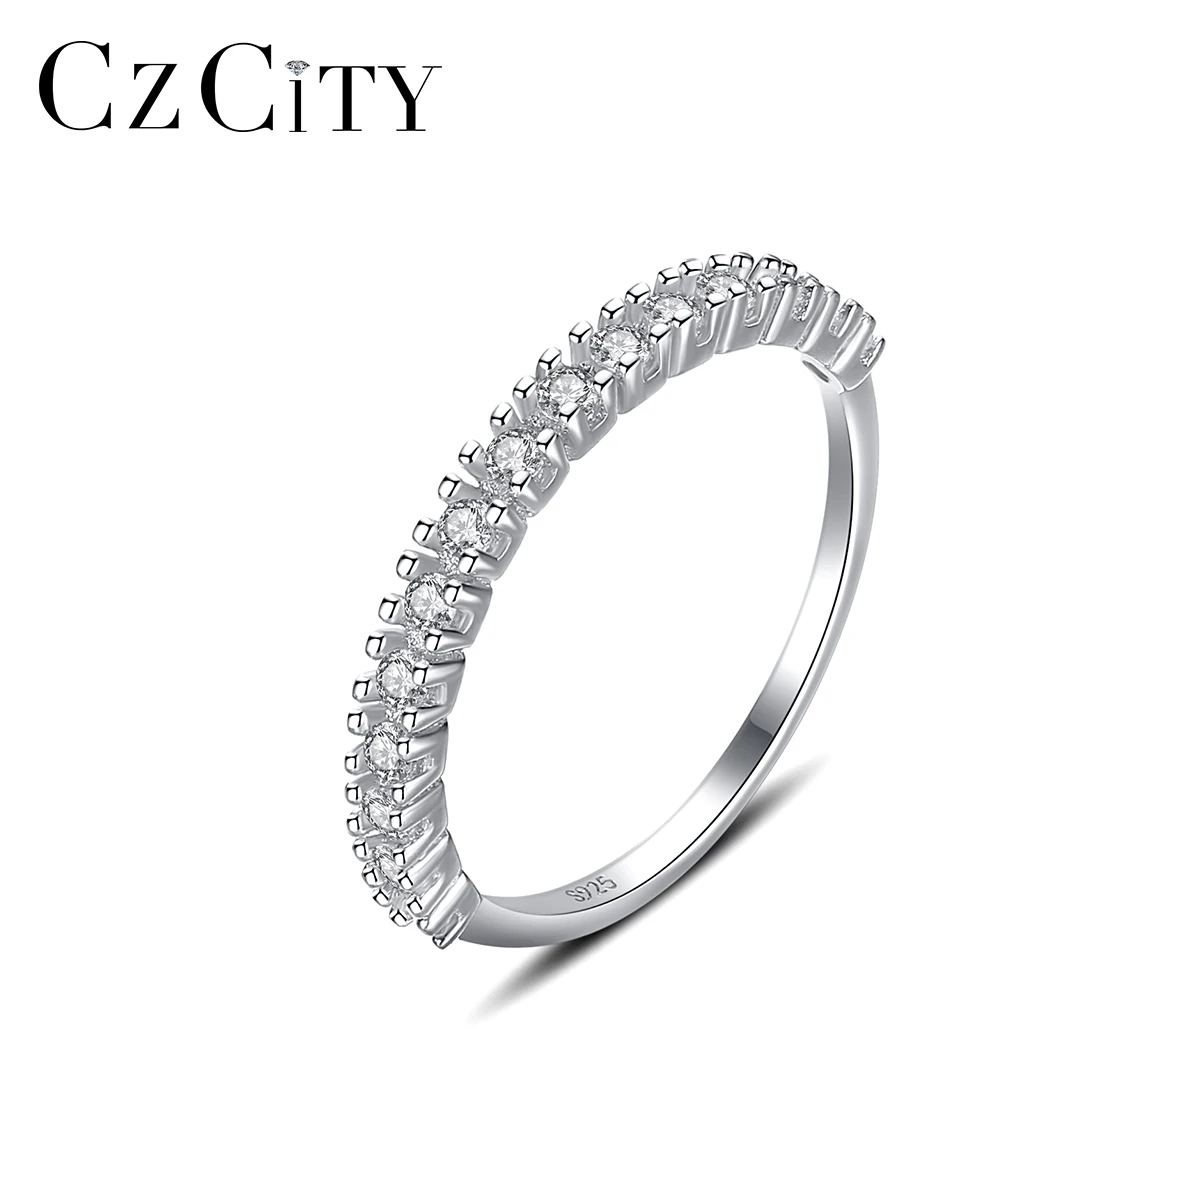 

CZCITY Ladies Finger Ring Real 925 Sterling Silver Cubic Zirconia Diamond Wedding Eternity Band Ring